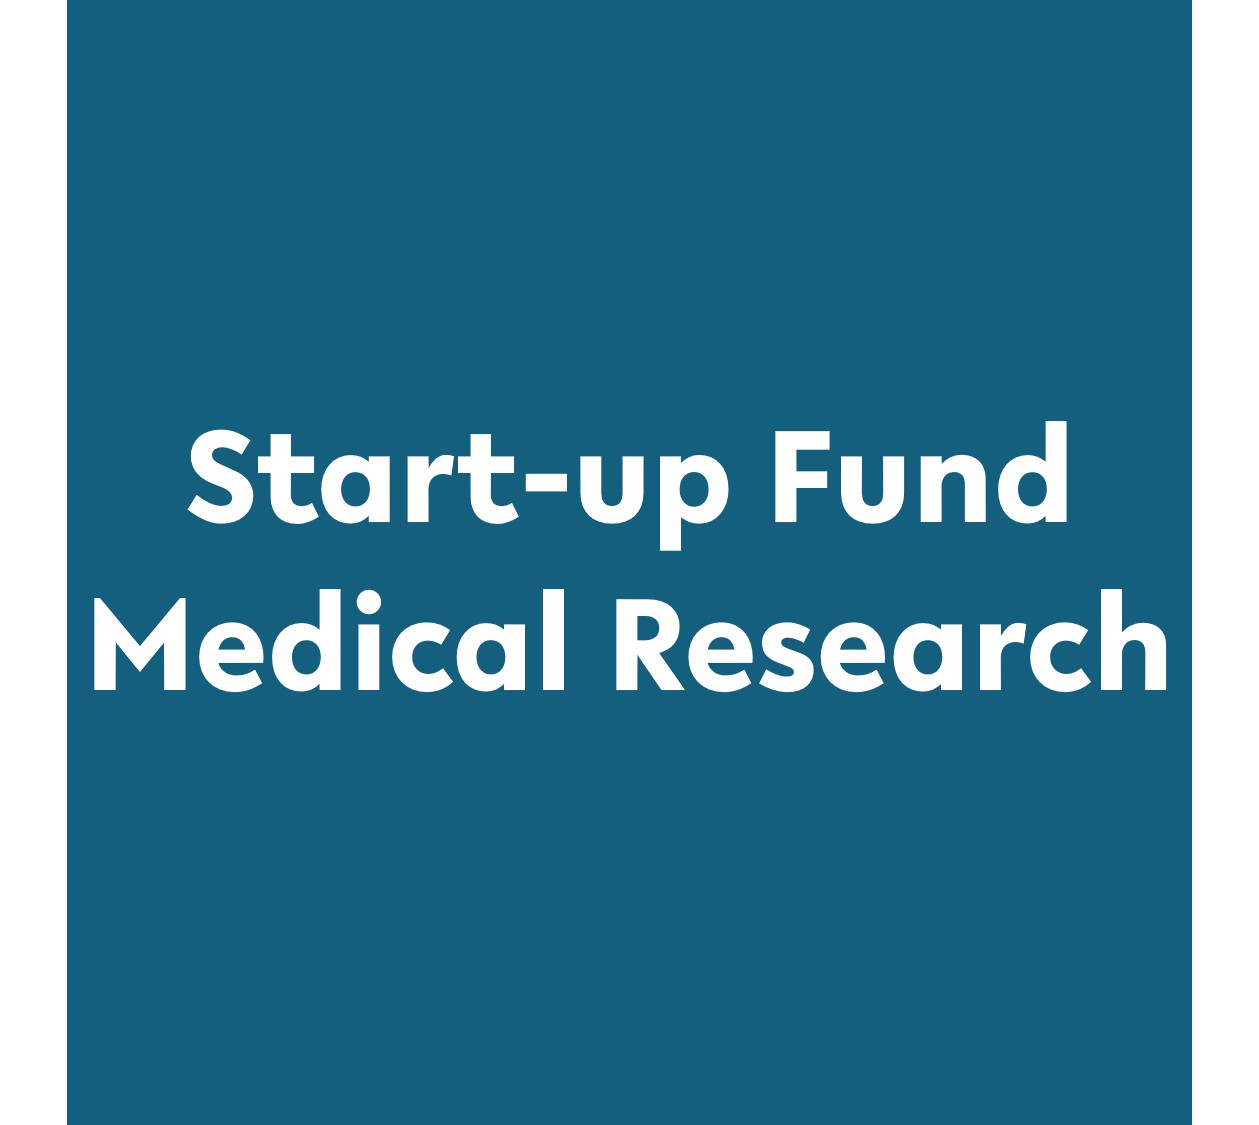 Blue Square with Text: Start-up Fund Medical Research